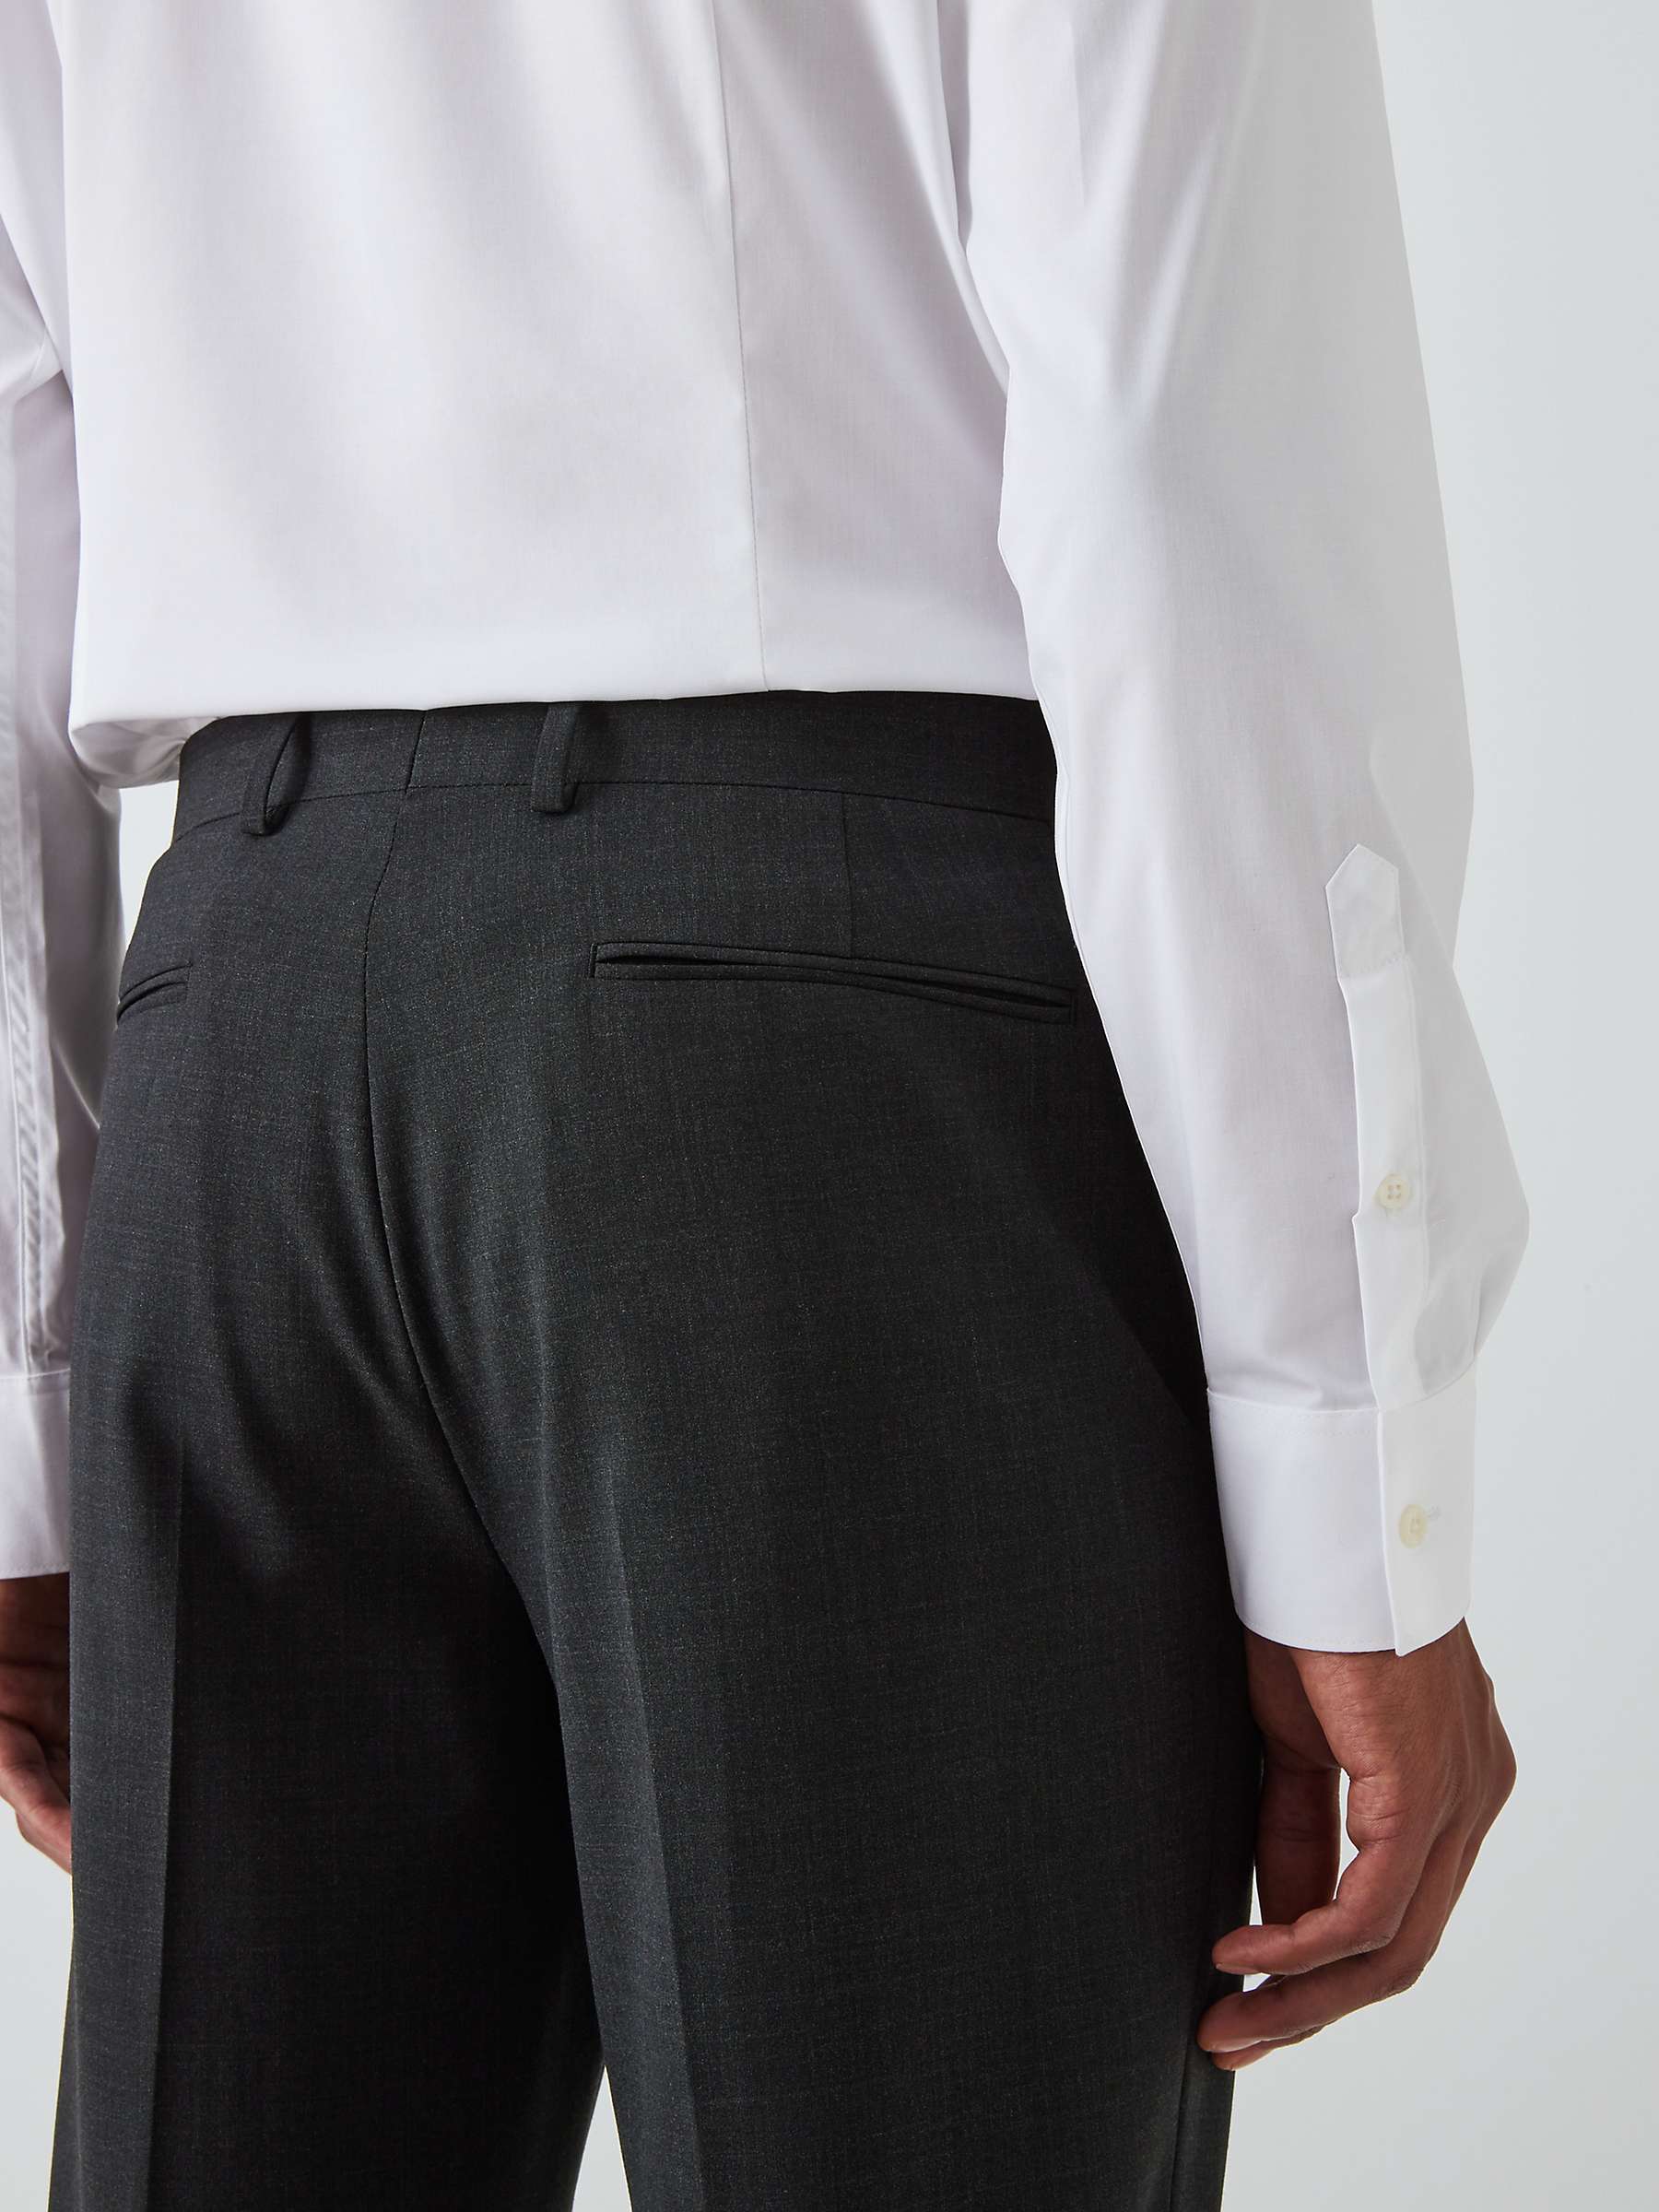 Buy Kin Wool Blend Slim Fit Suit Trousers, Charcoal Online at johnlewis.com